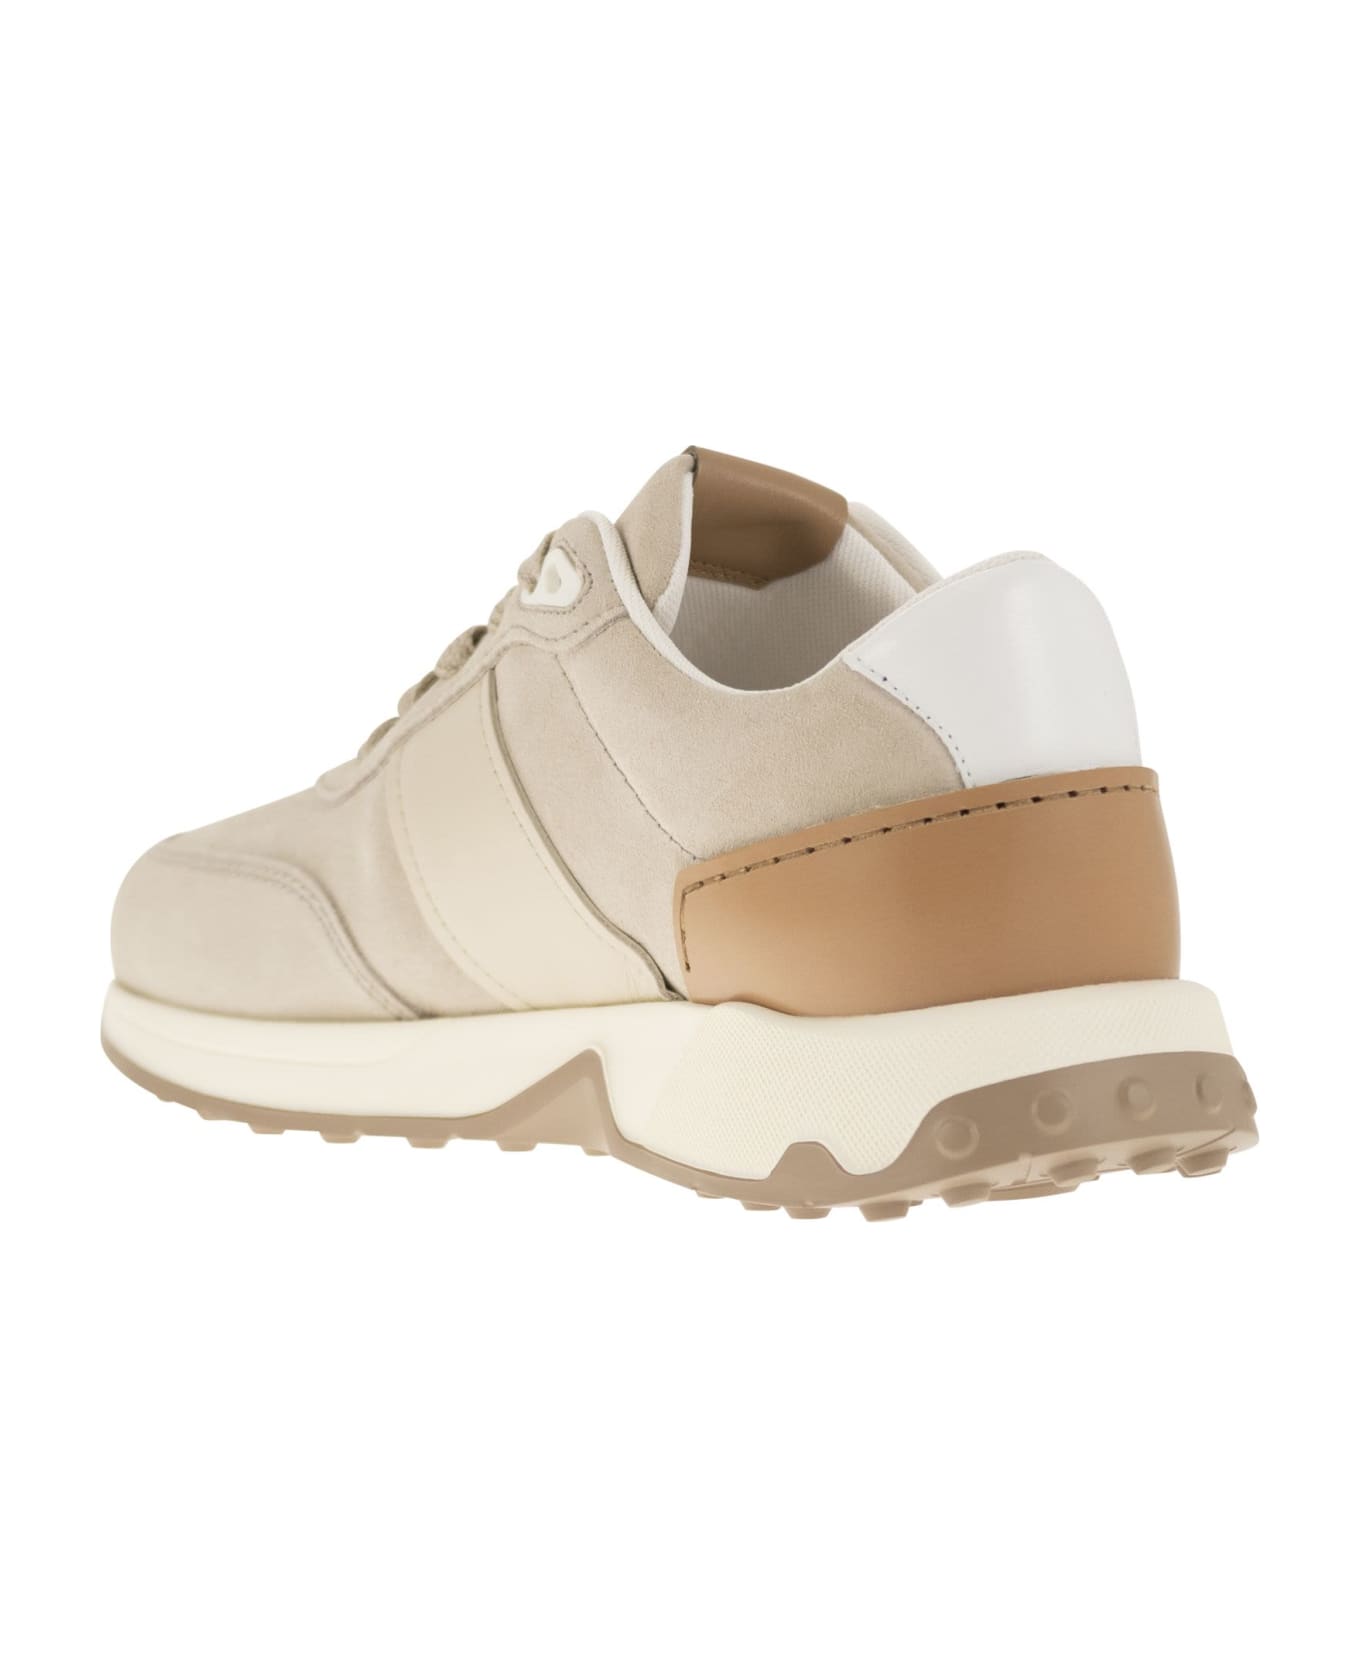 Tod's Suede Leather Sneakers - Sand スニーカー